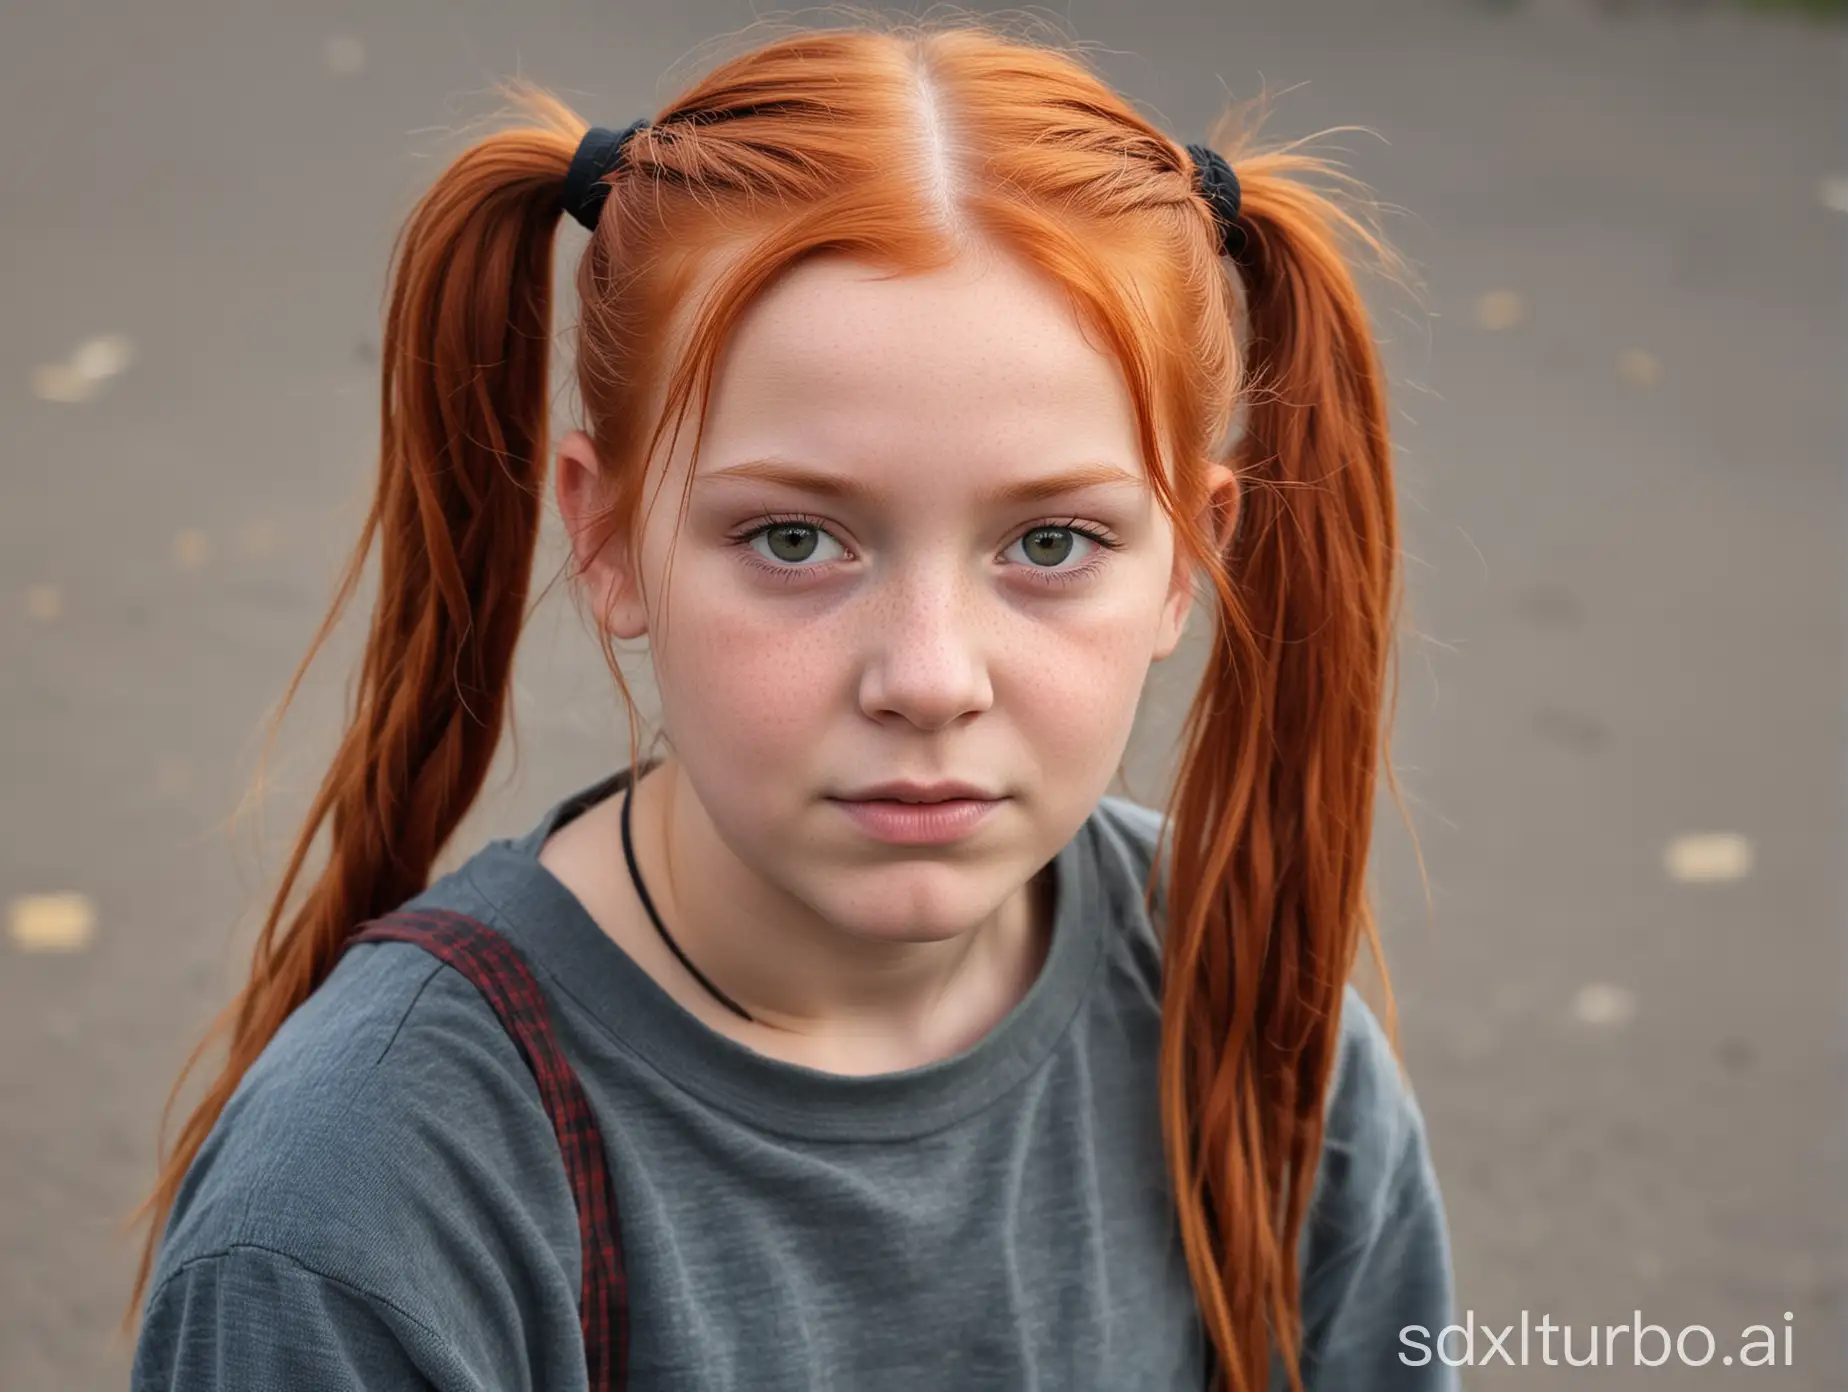 Homeless eleven year old girl with red hair in pigtails